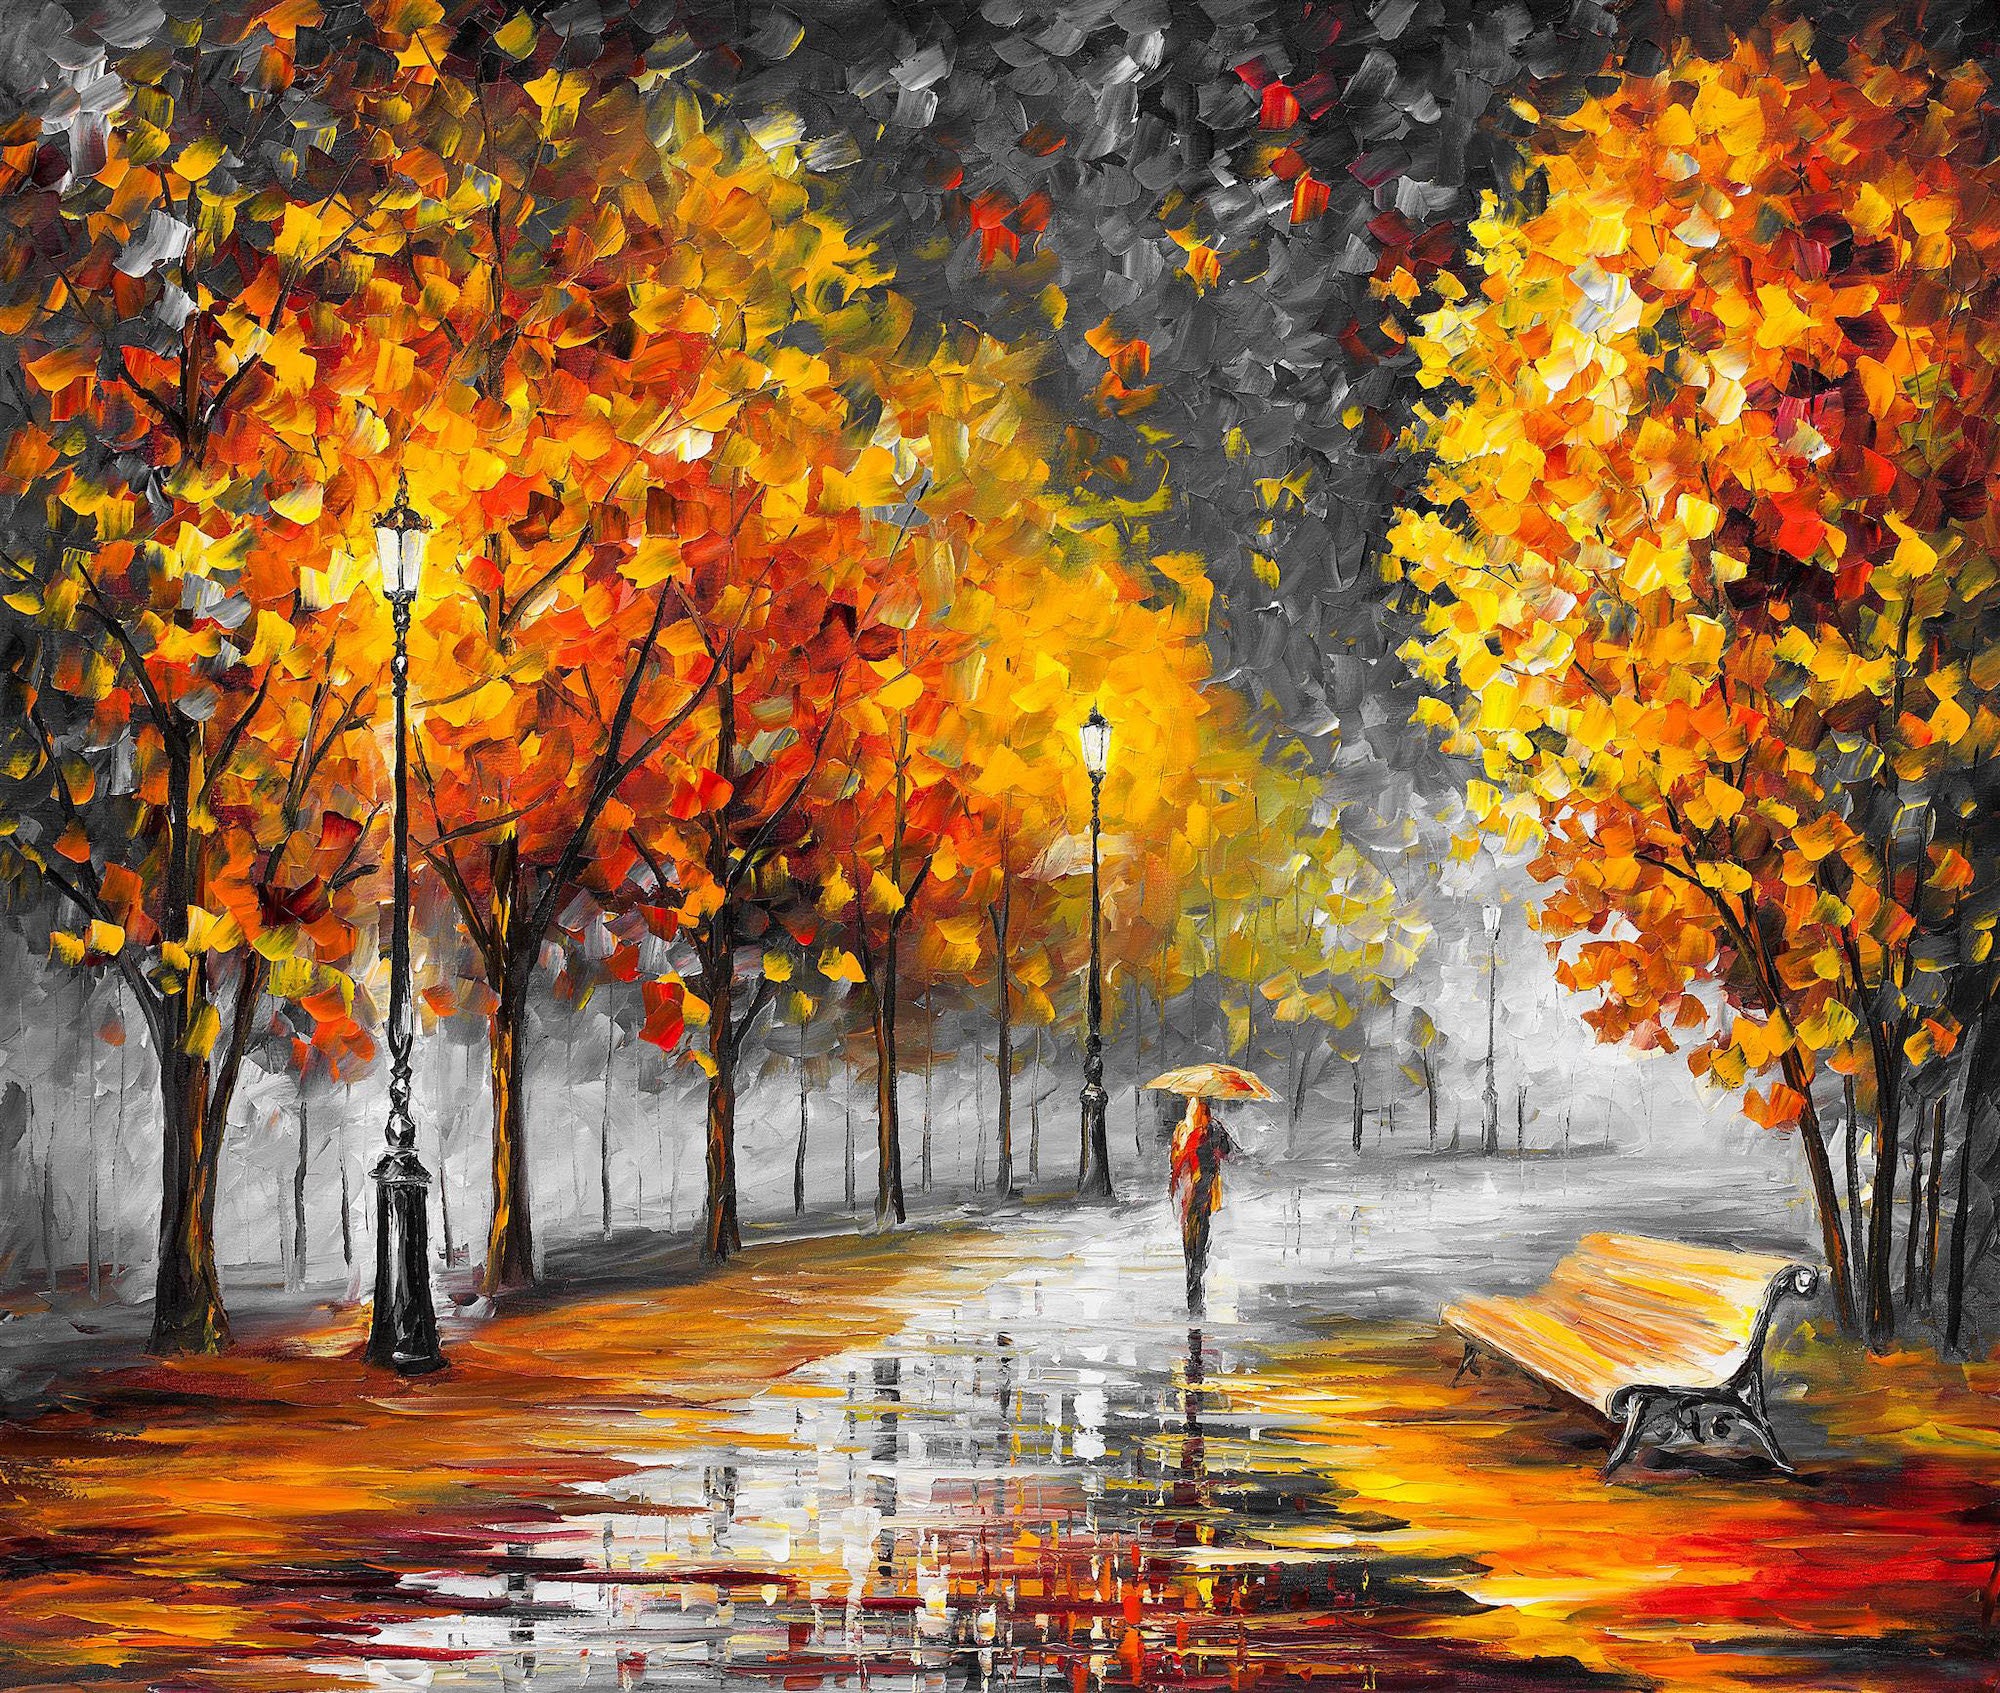 HAPPY STREET — PALETTE KNIFE Oil Painting On Canvas By Leonid Afremov -  Size 30x24